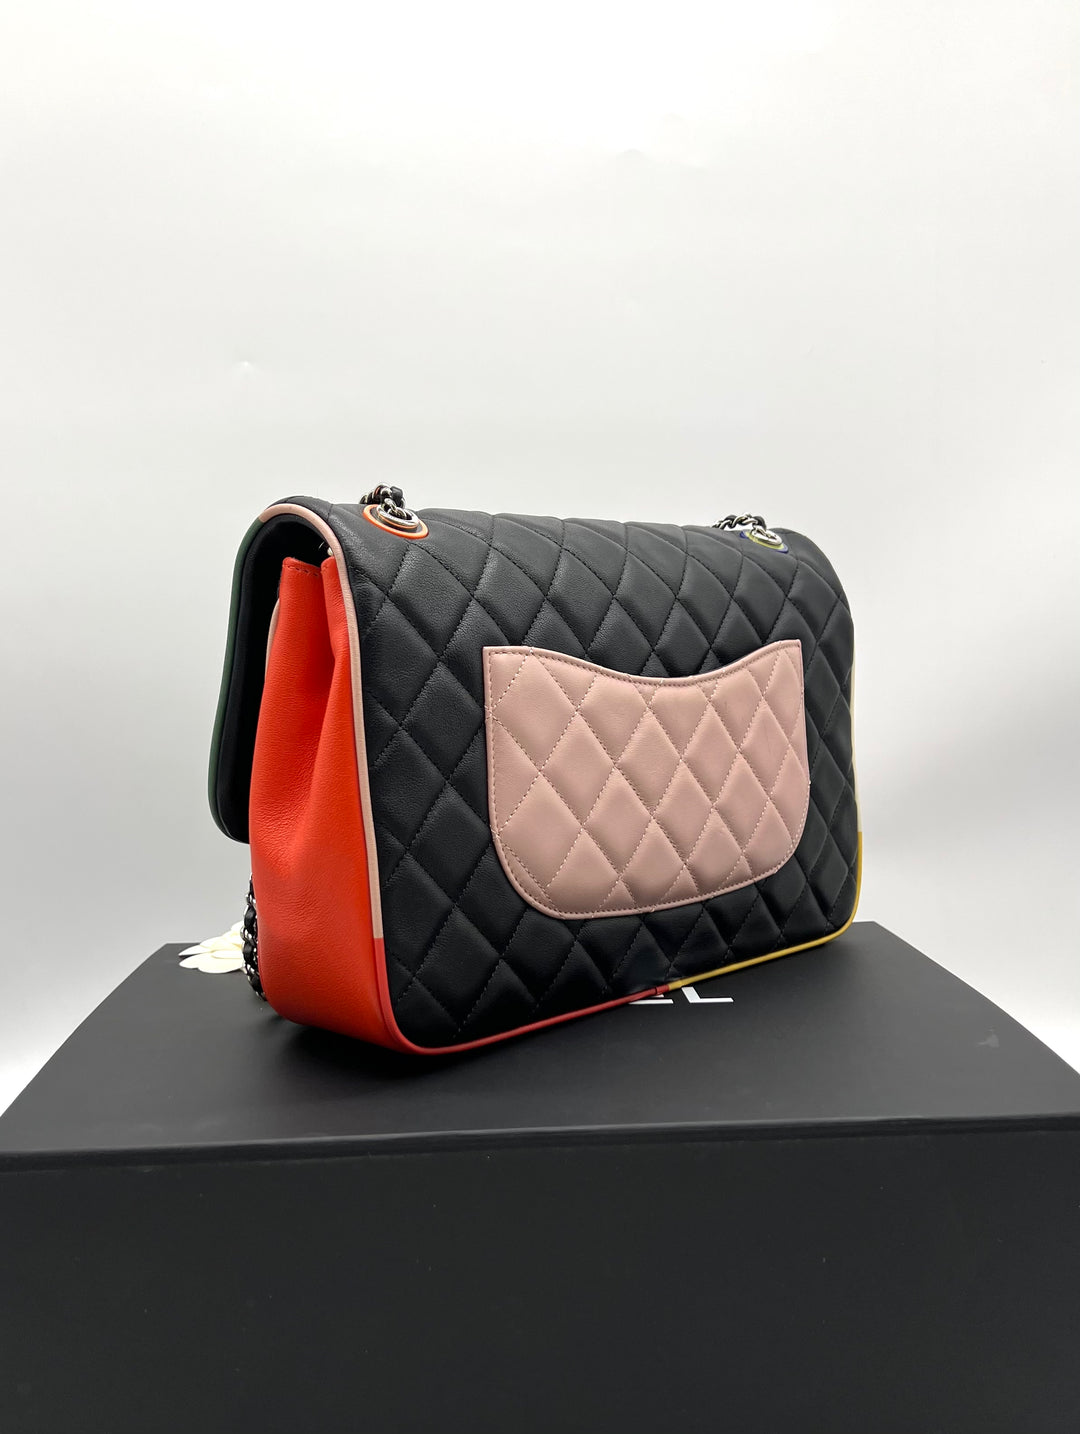 CHANEL Quilted Lambskin Jumbo Cuba Multi-Color Flap Bag